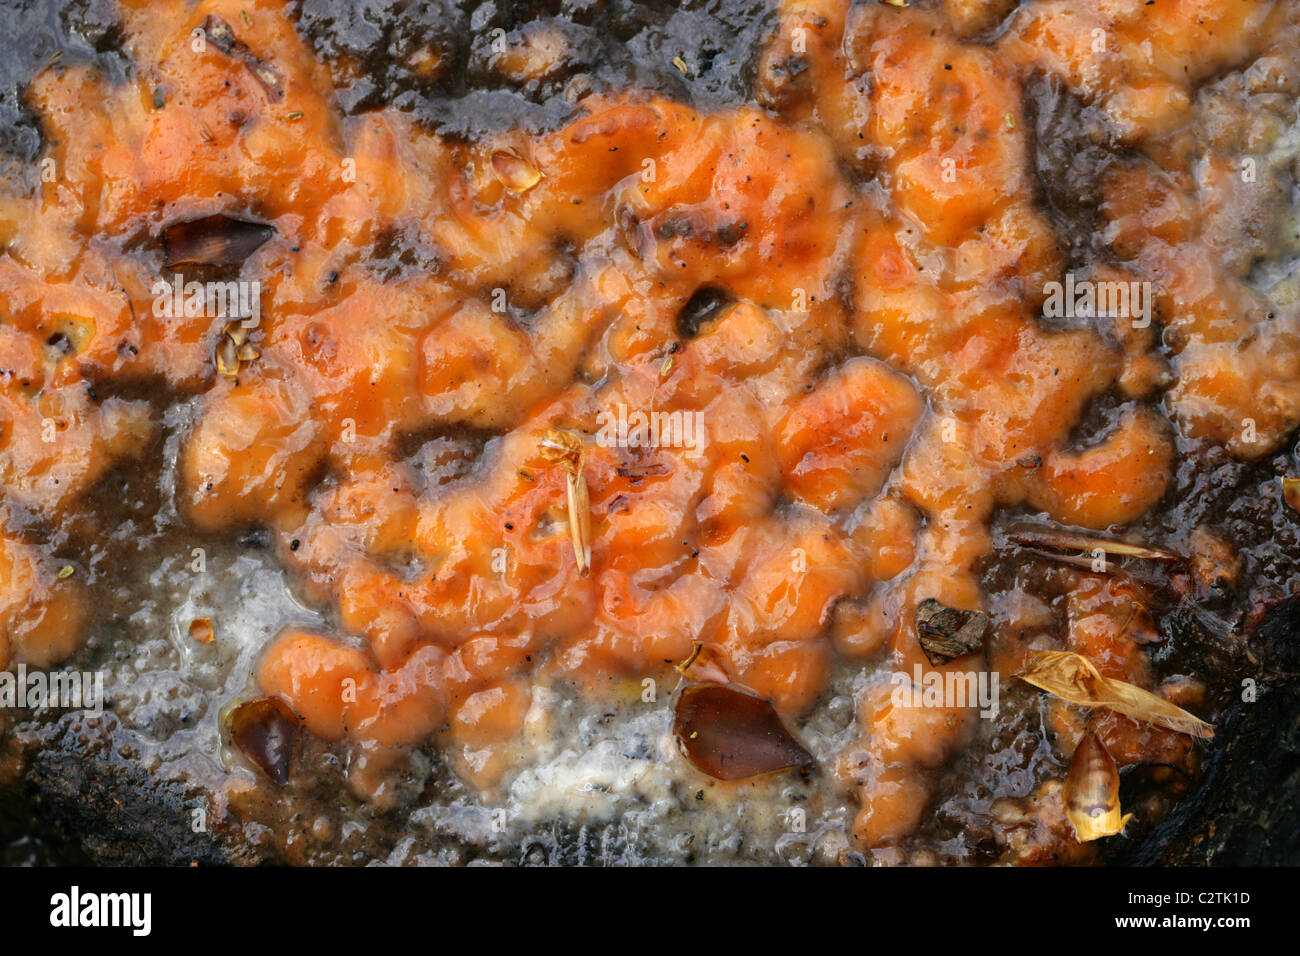 Orange Slime Flux Exuding from a Recently Cut Tree Stump. A Mixture of Microfungi, Yeasts and Bacteria Feeding on Tree Sap. Stock Photo